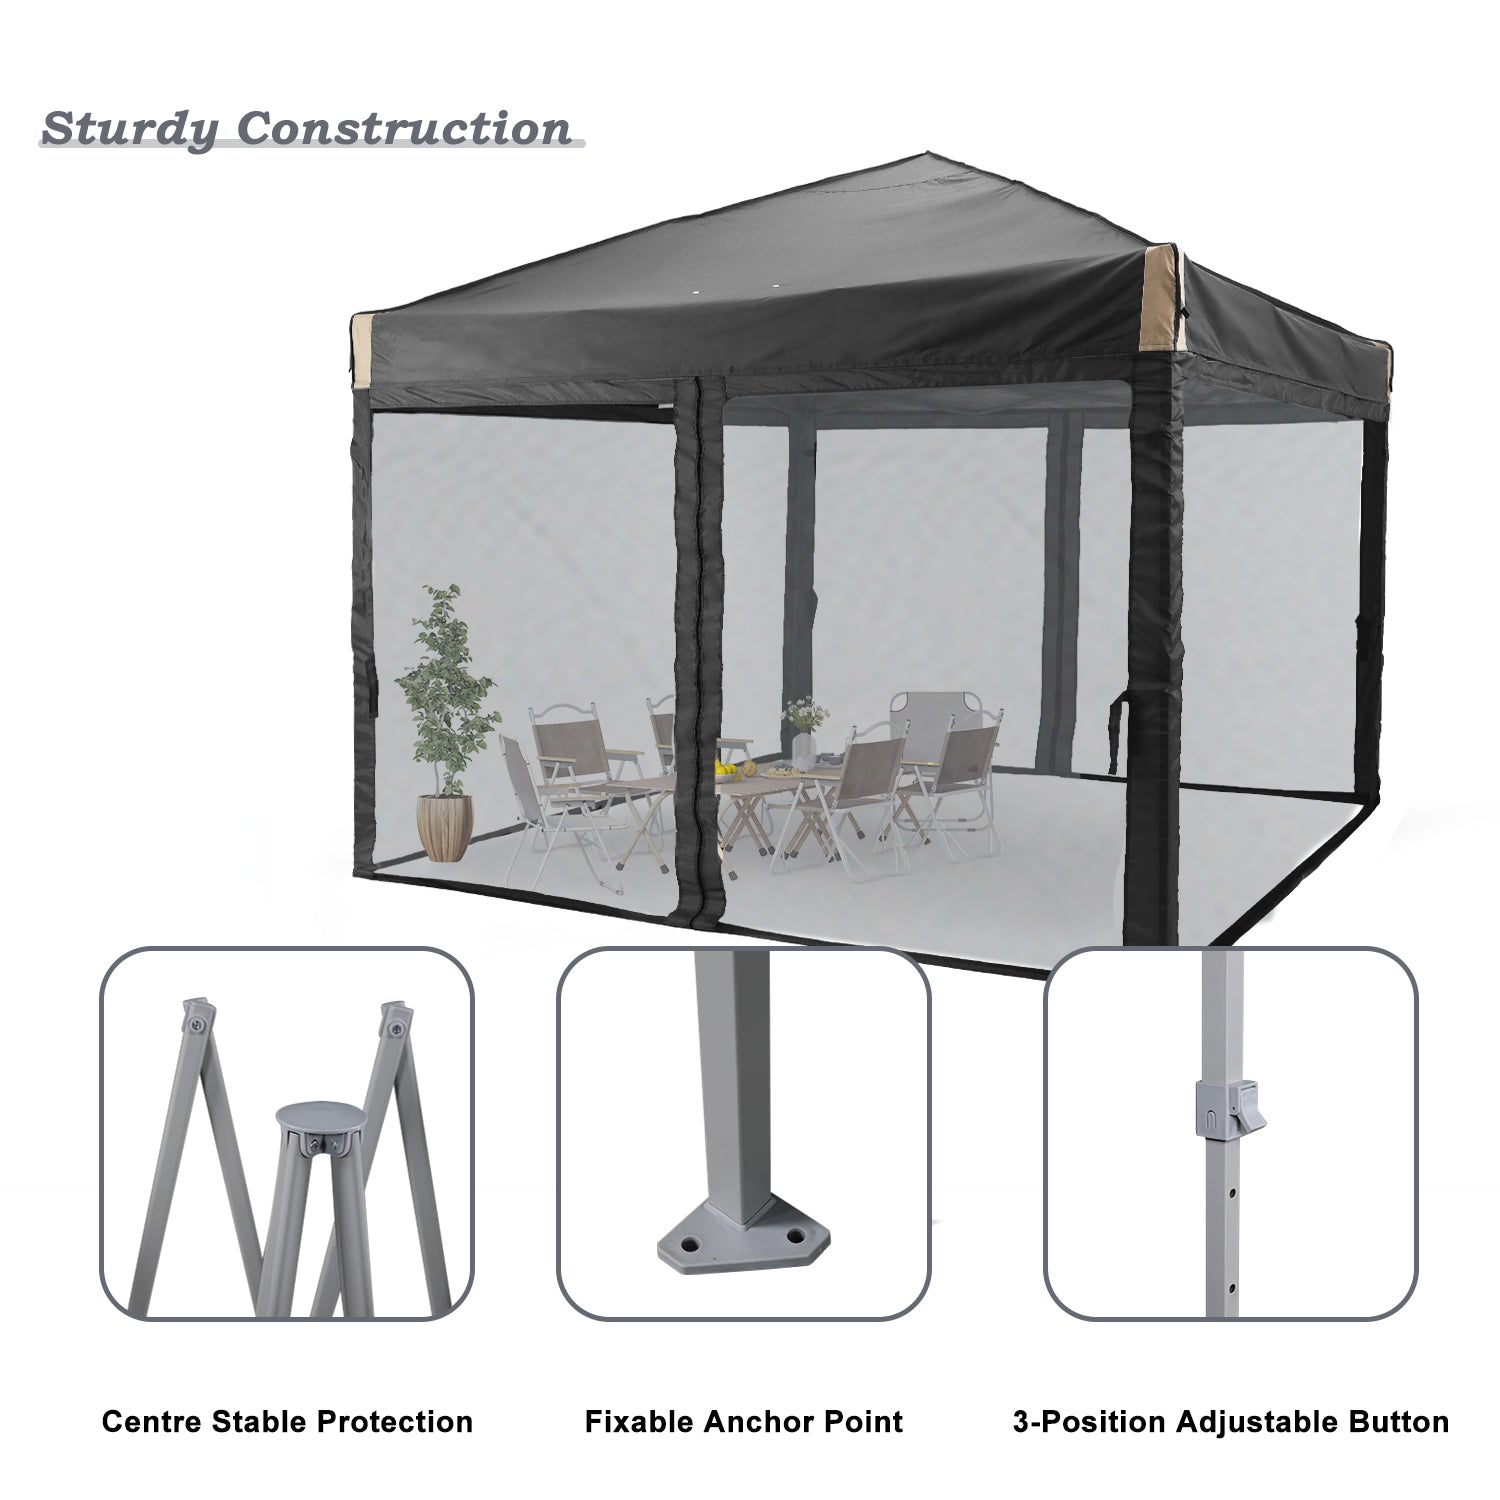 Pop Up Canopy Tent with Removable Mesh Sidewalls Gazebo part Aoodor LLC   